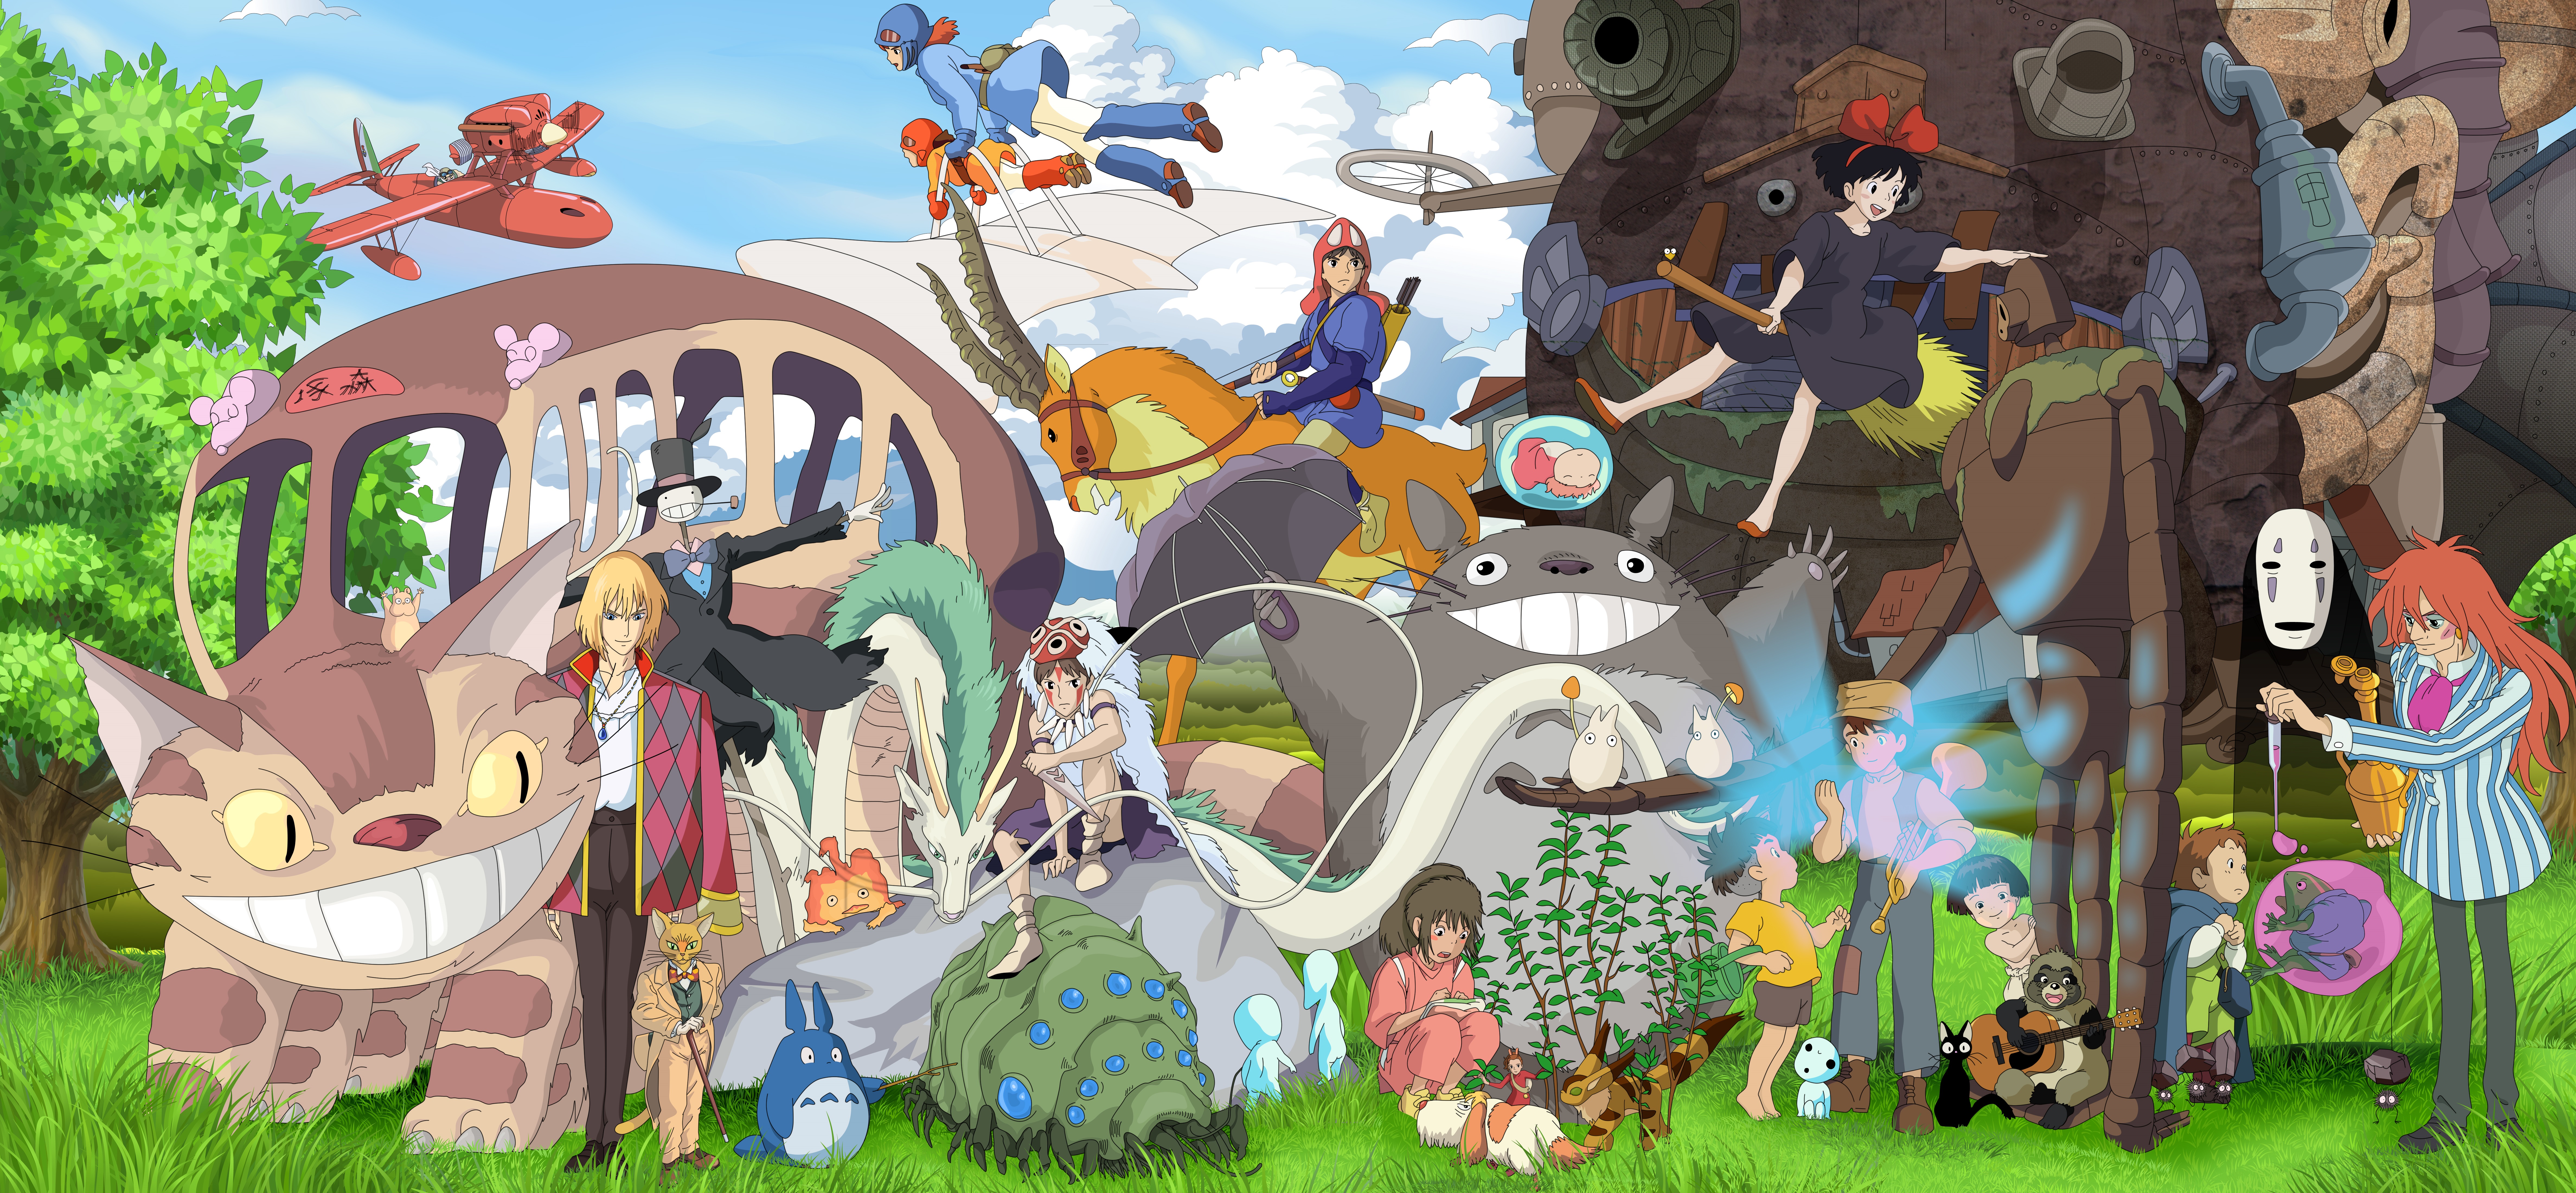 Studio Ghibli Anime Spirited Away My Neighbor Totoro Kiki&;s Delivery Service Princess Mononoke Porco Rosso Howl&;s Moving Castle Castle In The Sky Nausicaa Of The Valley Of The Wind 9500x4400 UHD Wallpaper